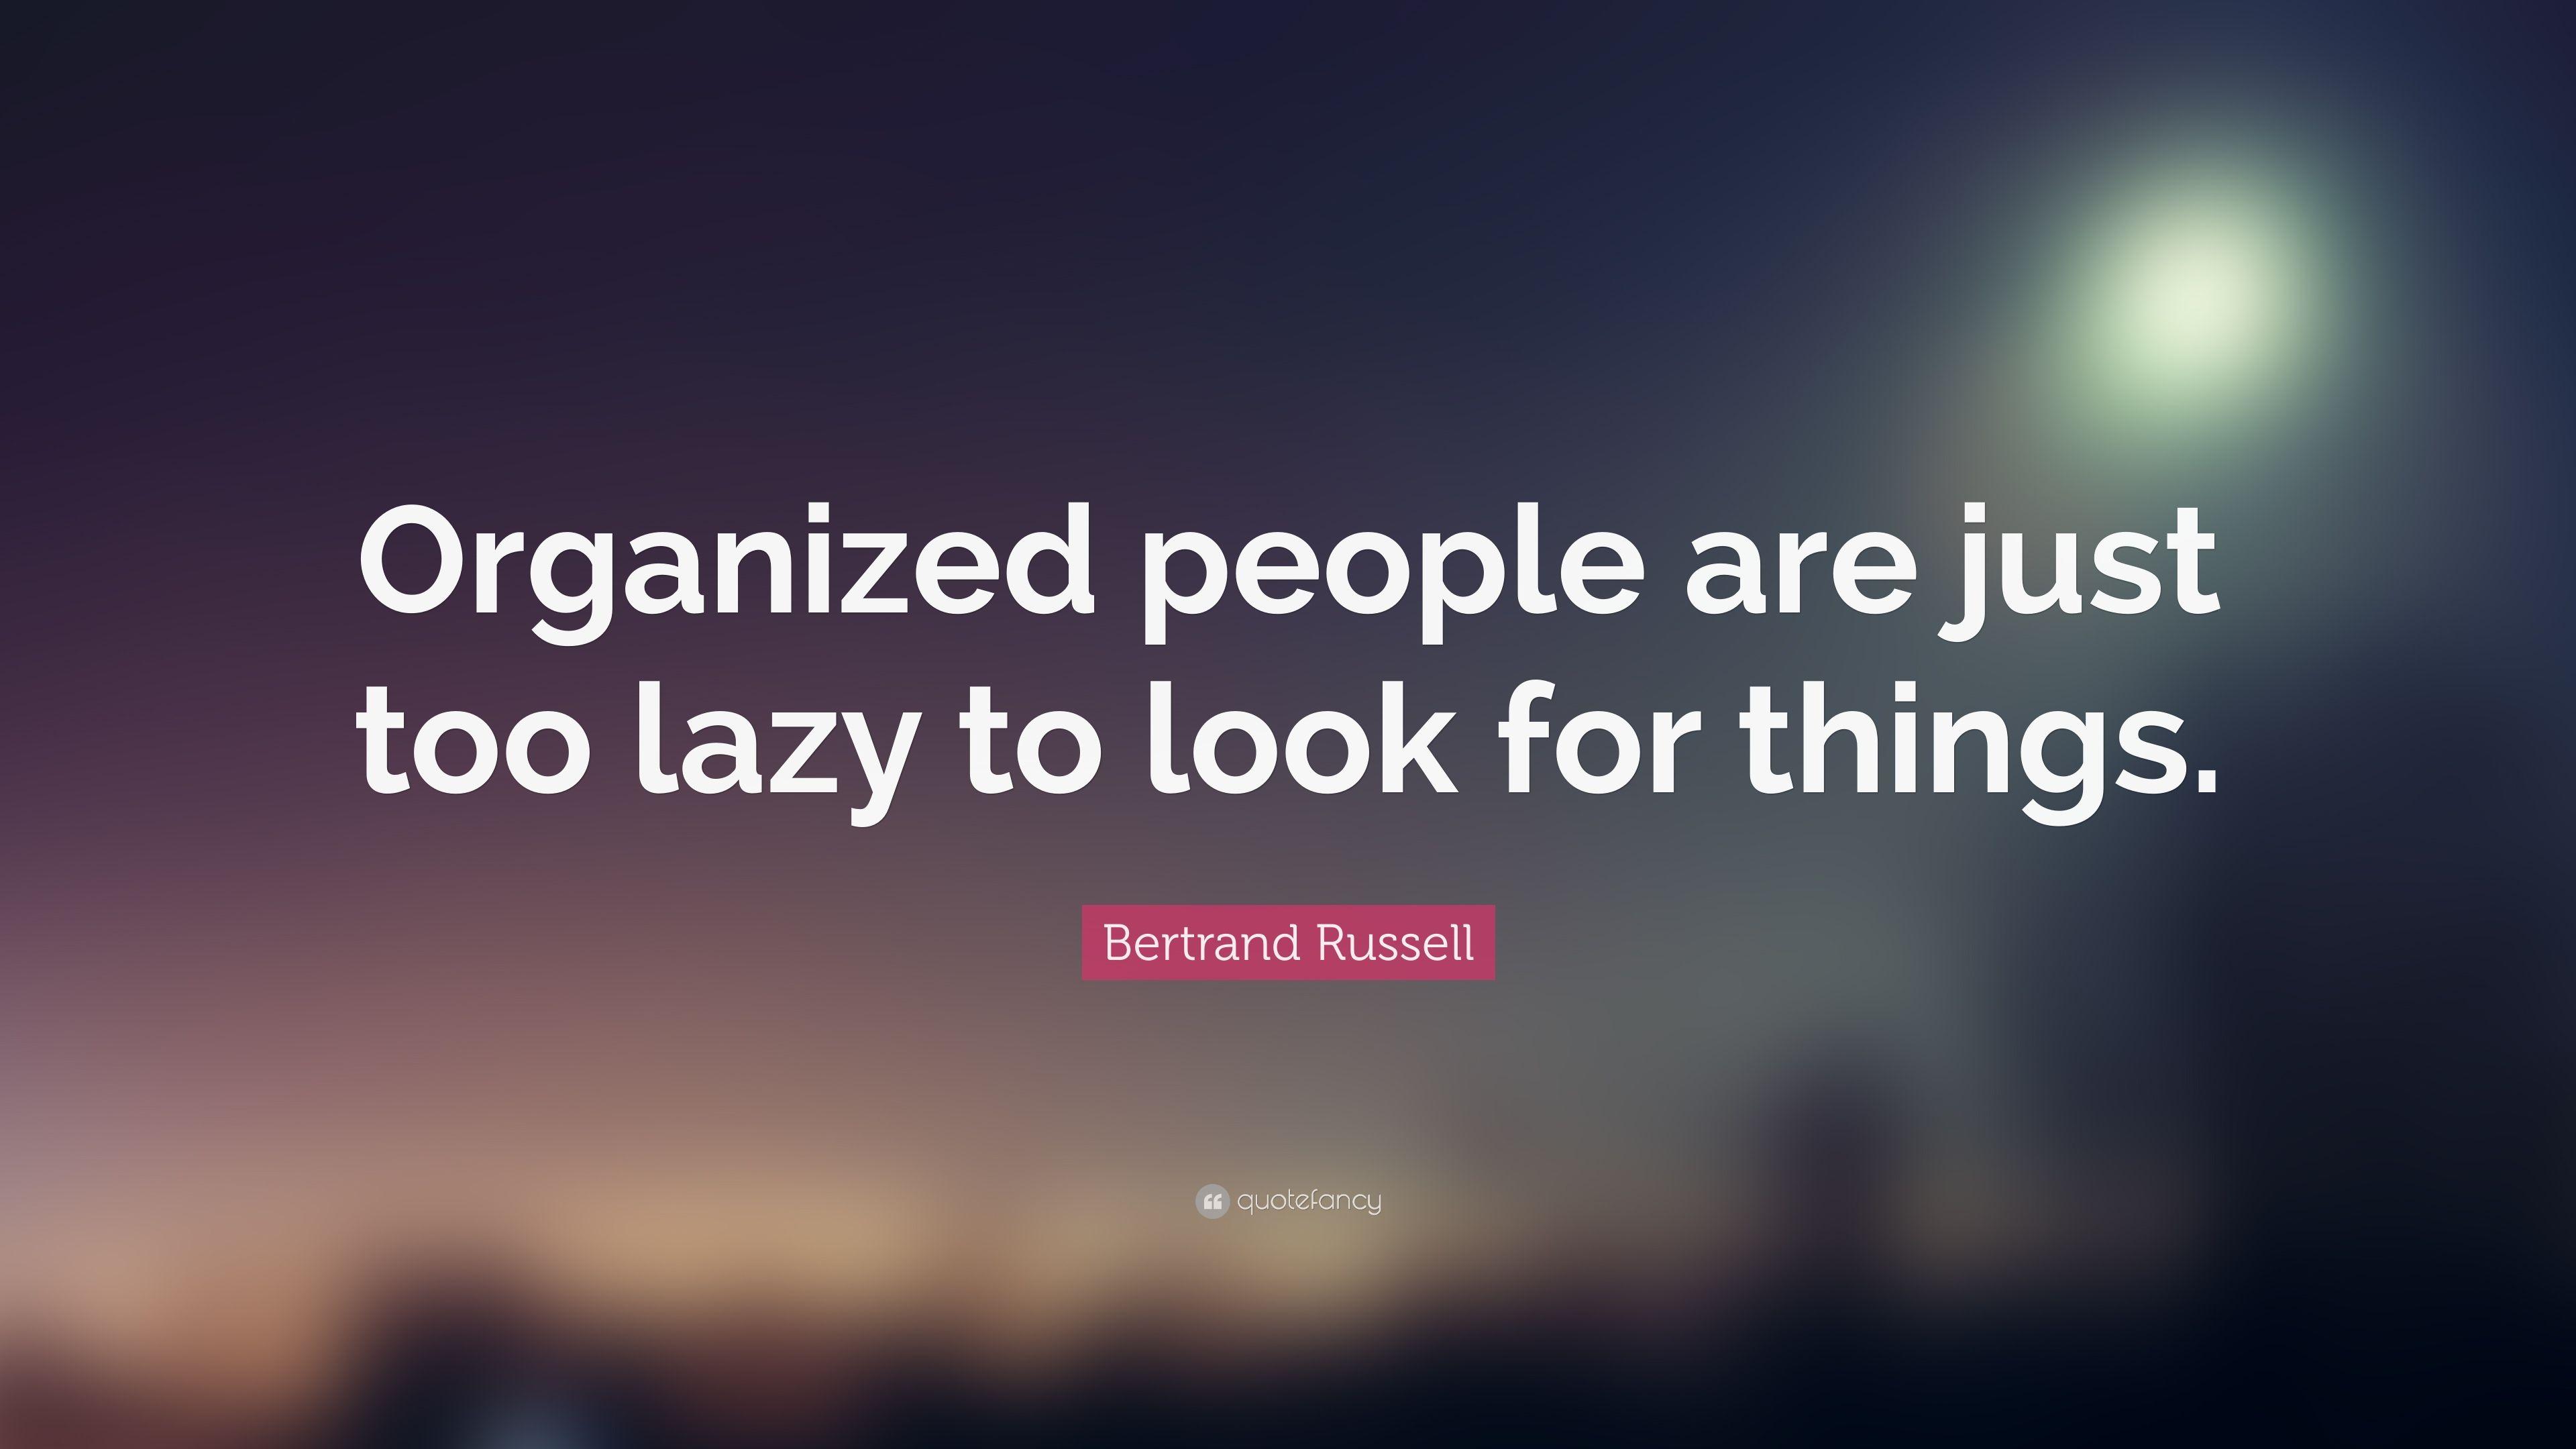 Bertrand Russell Quote: “Organized people are just too lazy to look